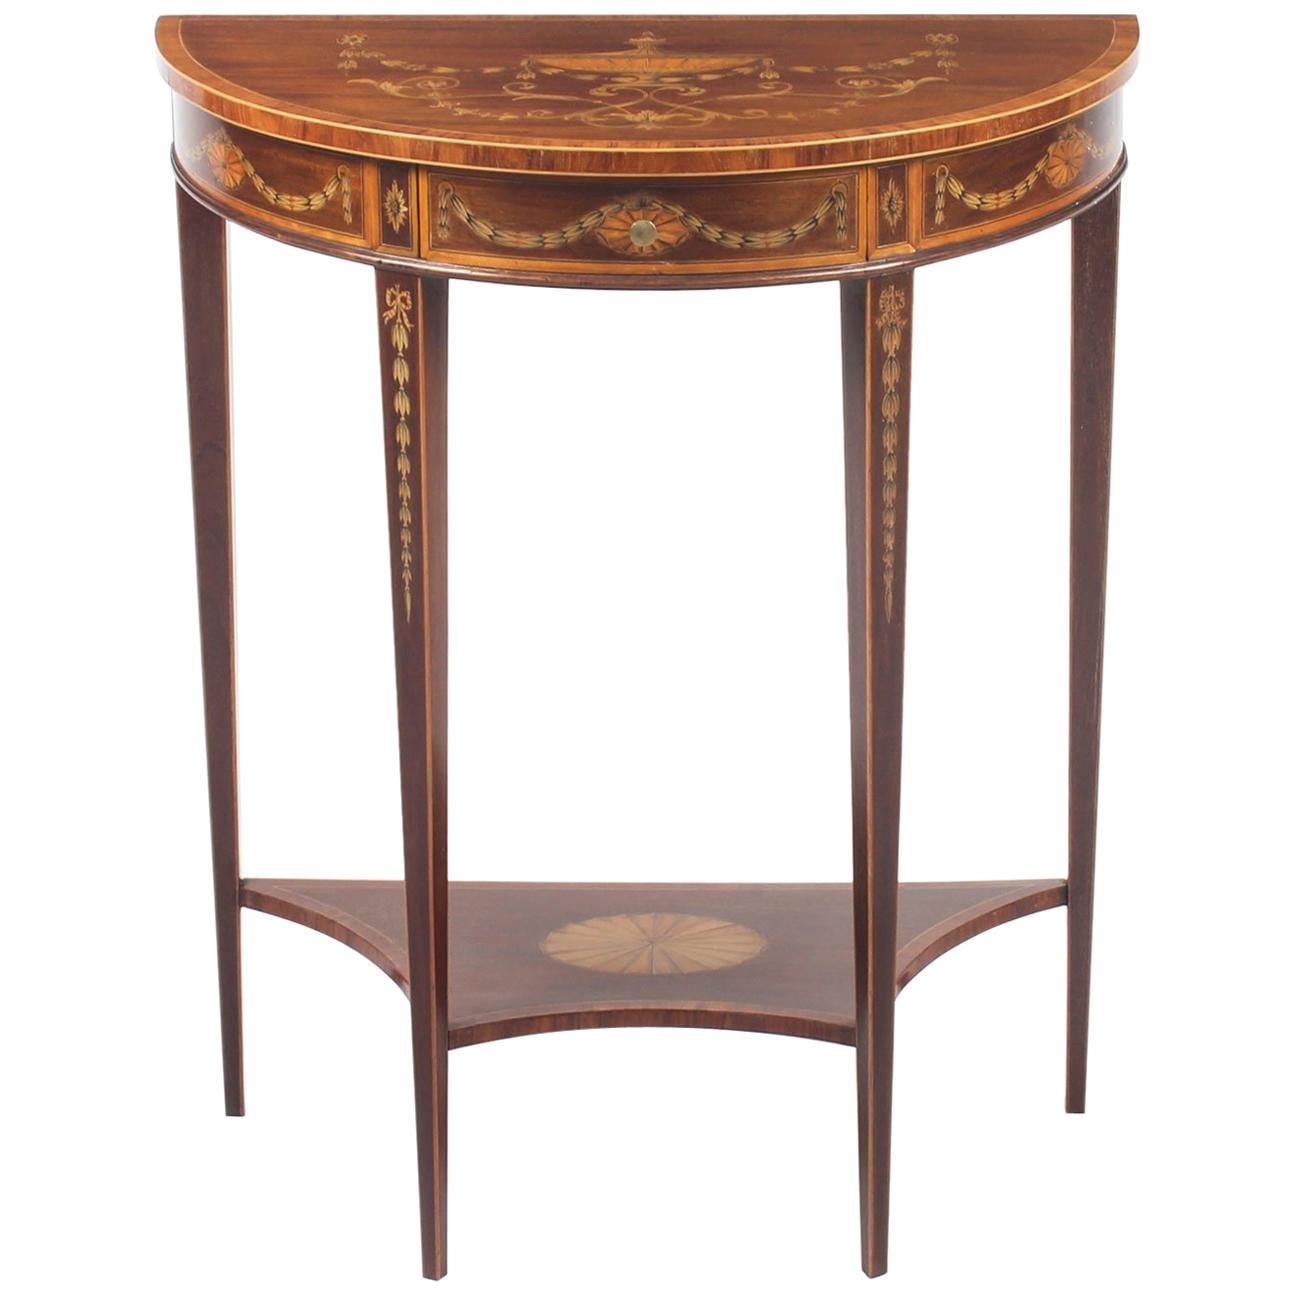 Antique Regency Revival Marquetry Console Table, 19th Century